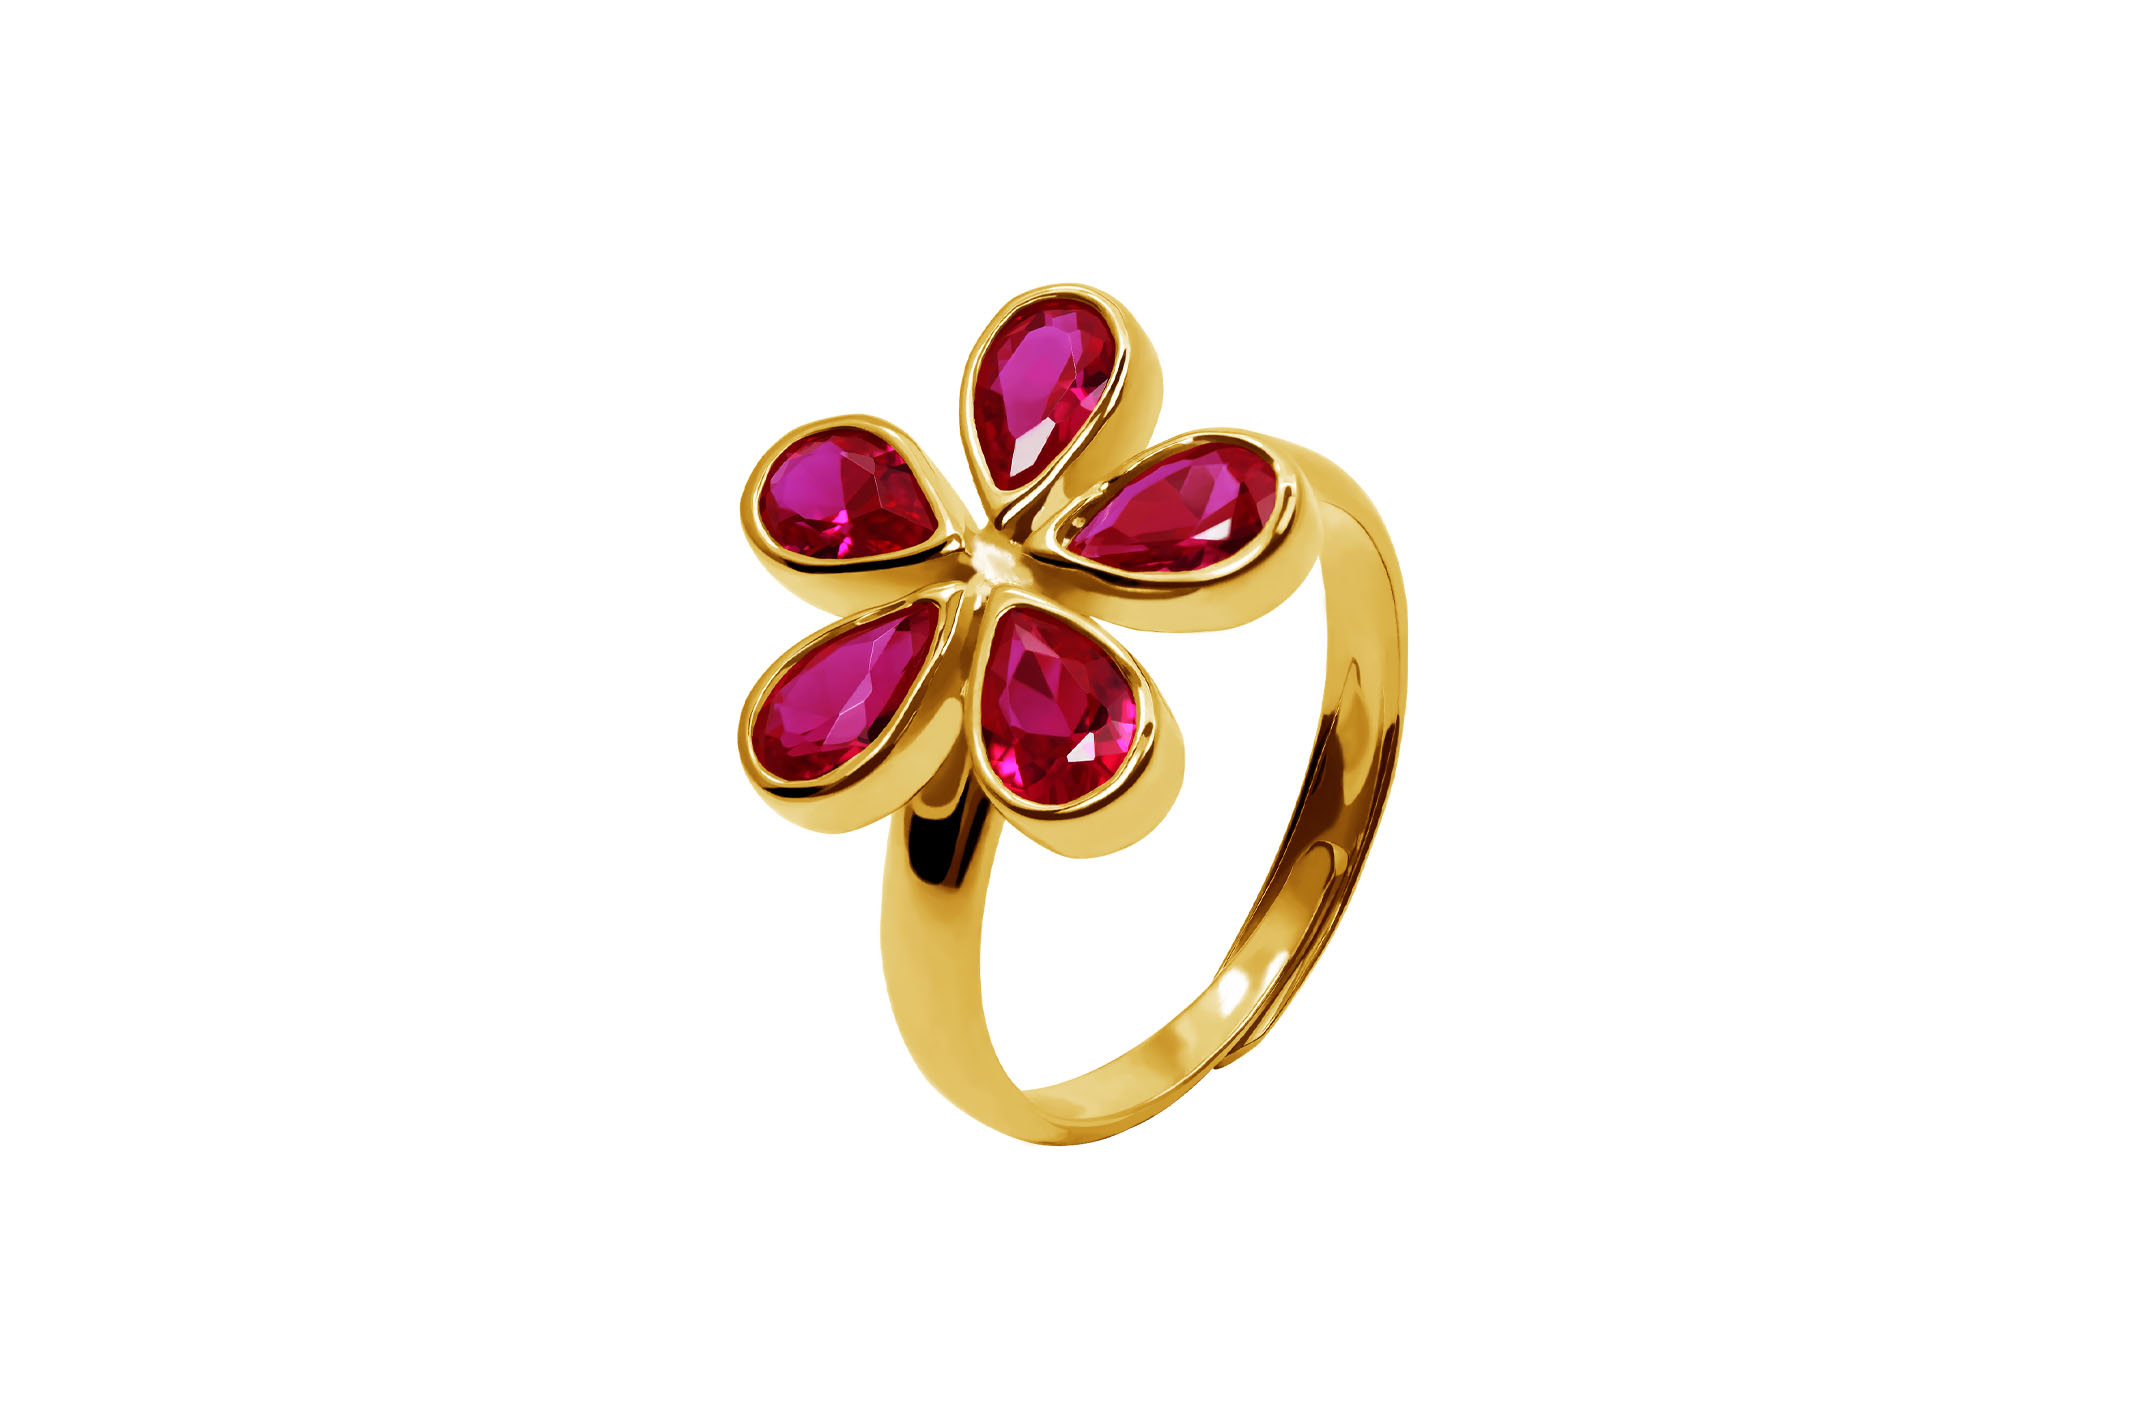 Jewel: ring;Material: 925 silver;Weight: 3.5 gr;Stones: zirconias;Color: yellow;Size:Adjustable;Gender:woman